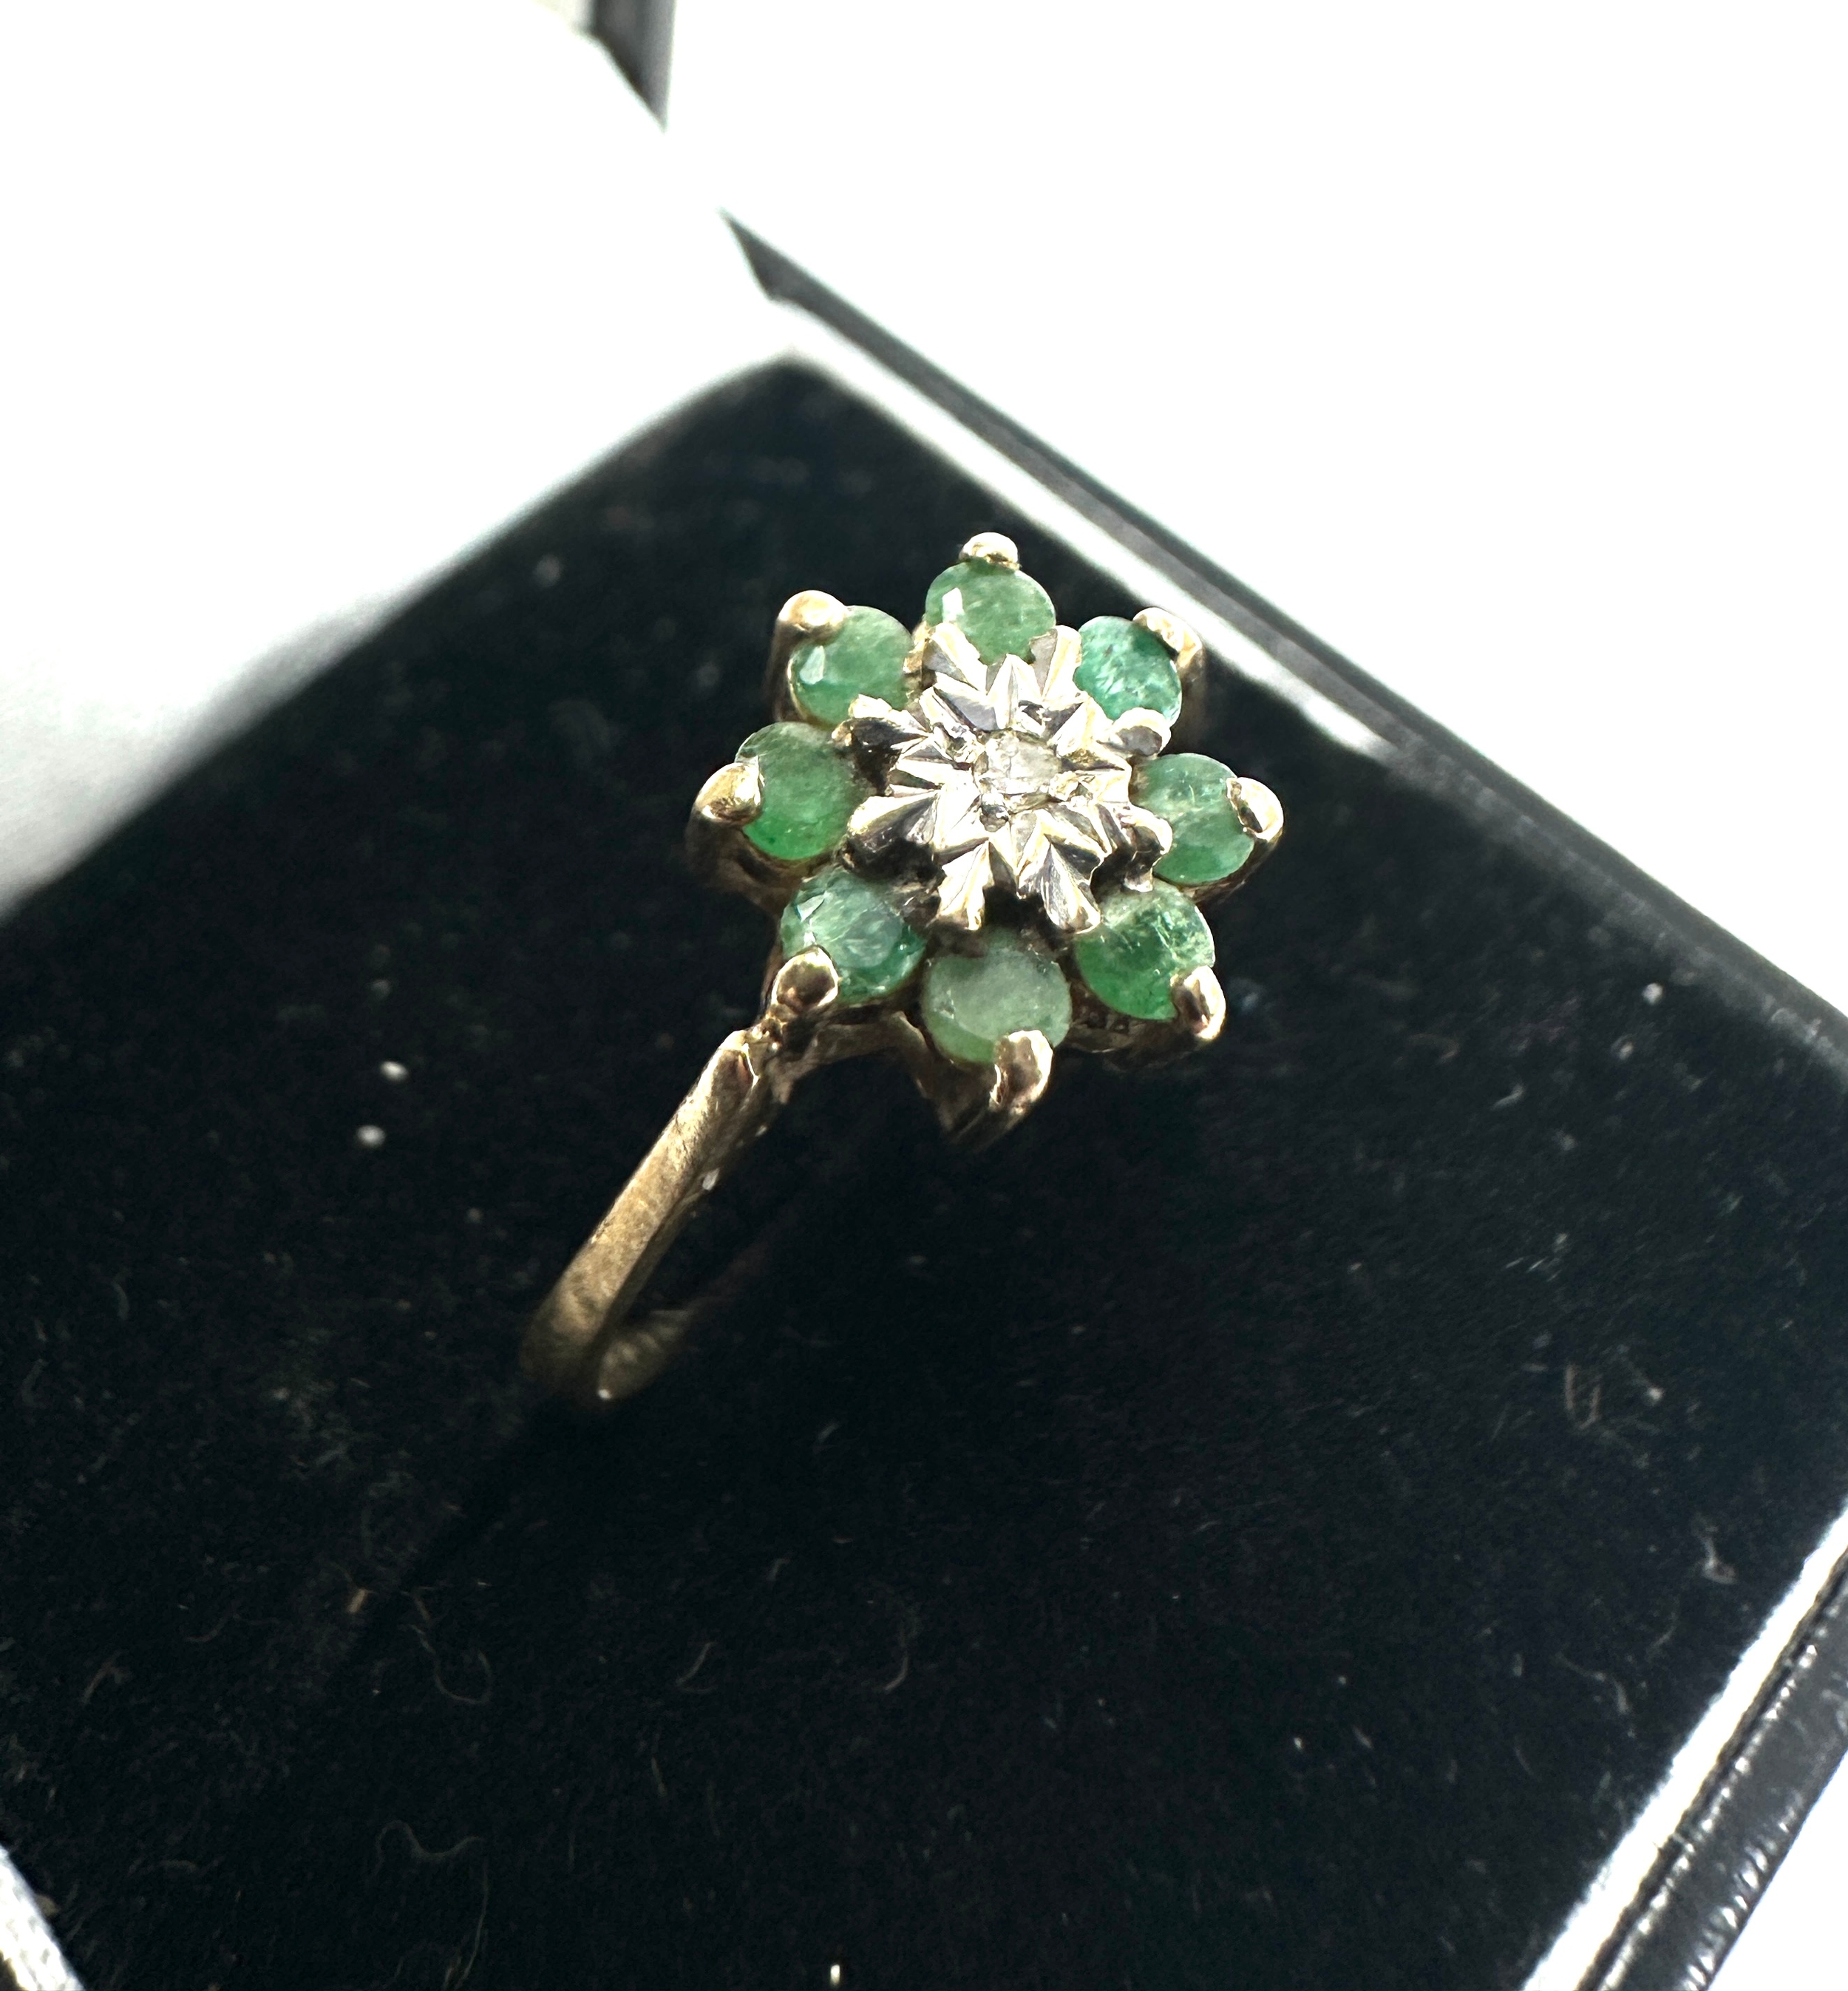 9ct gold diamond & emerald ring weight 1.9g - Image 2 of 4